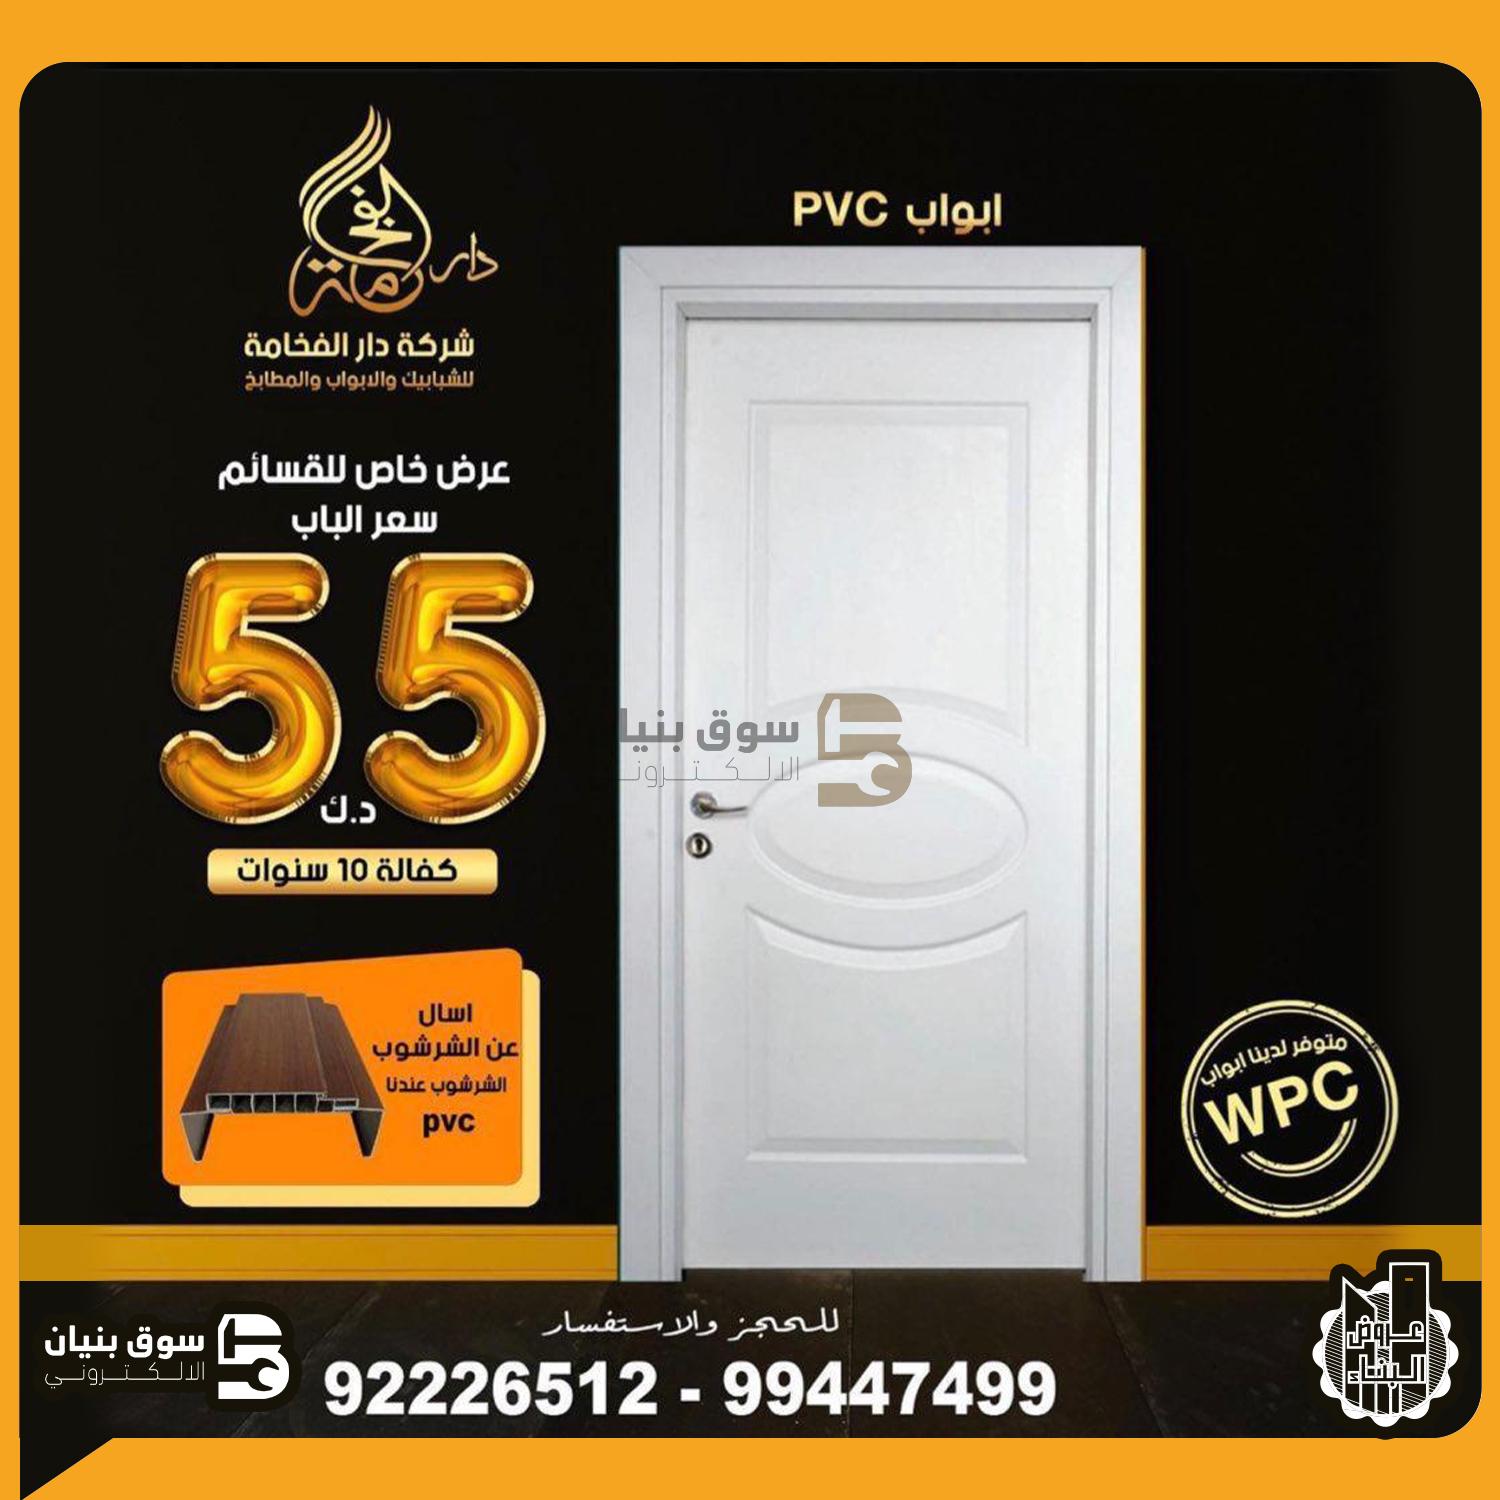 Offer from Dar Al Fakhama Company for Windows, Doors and Kitchens